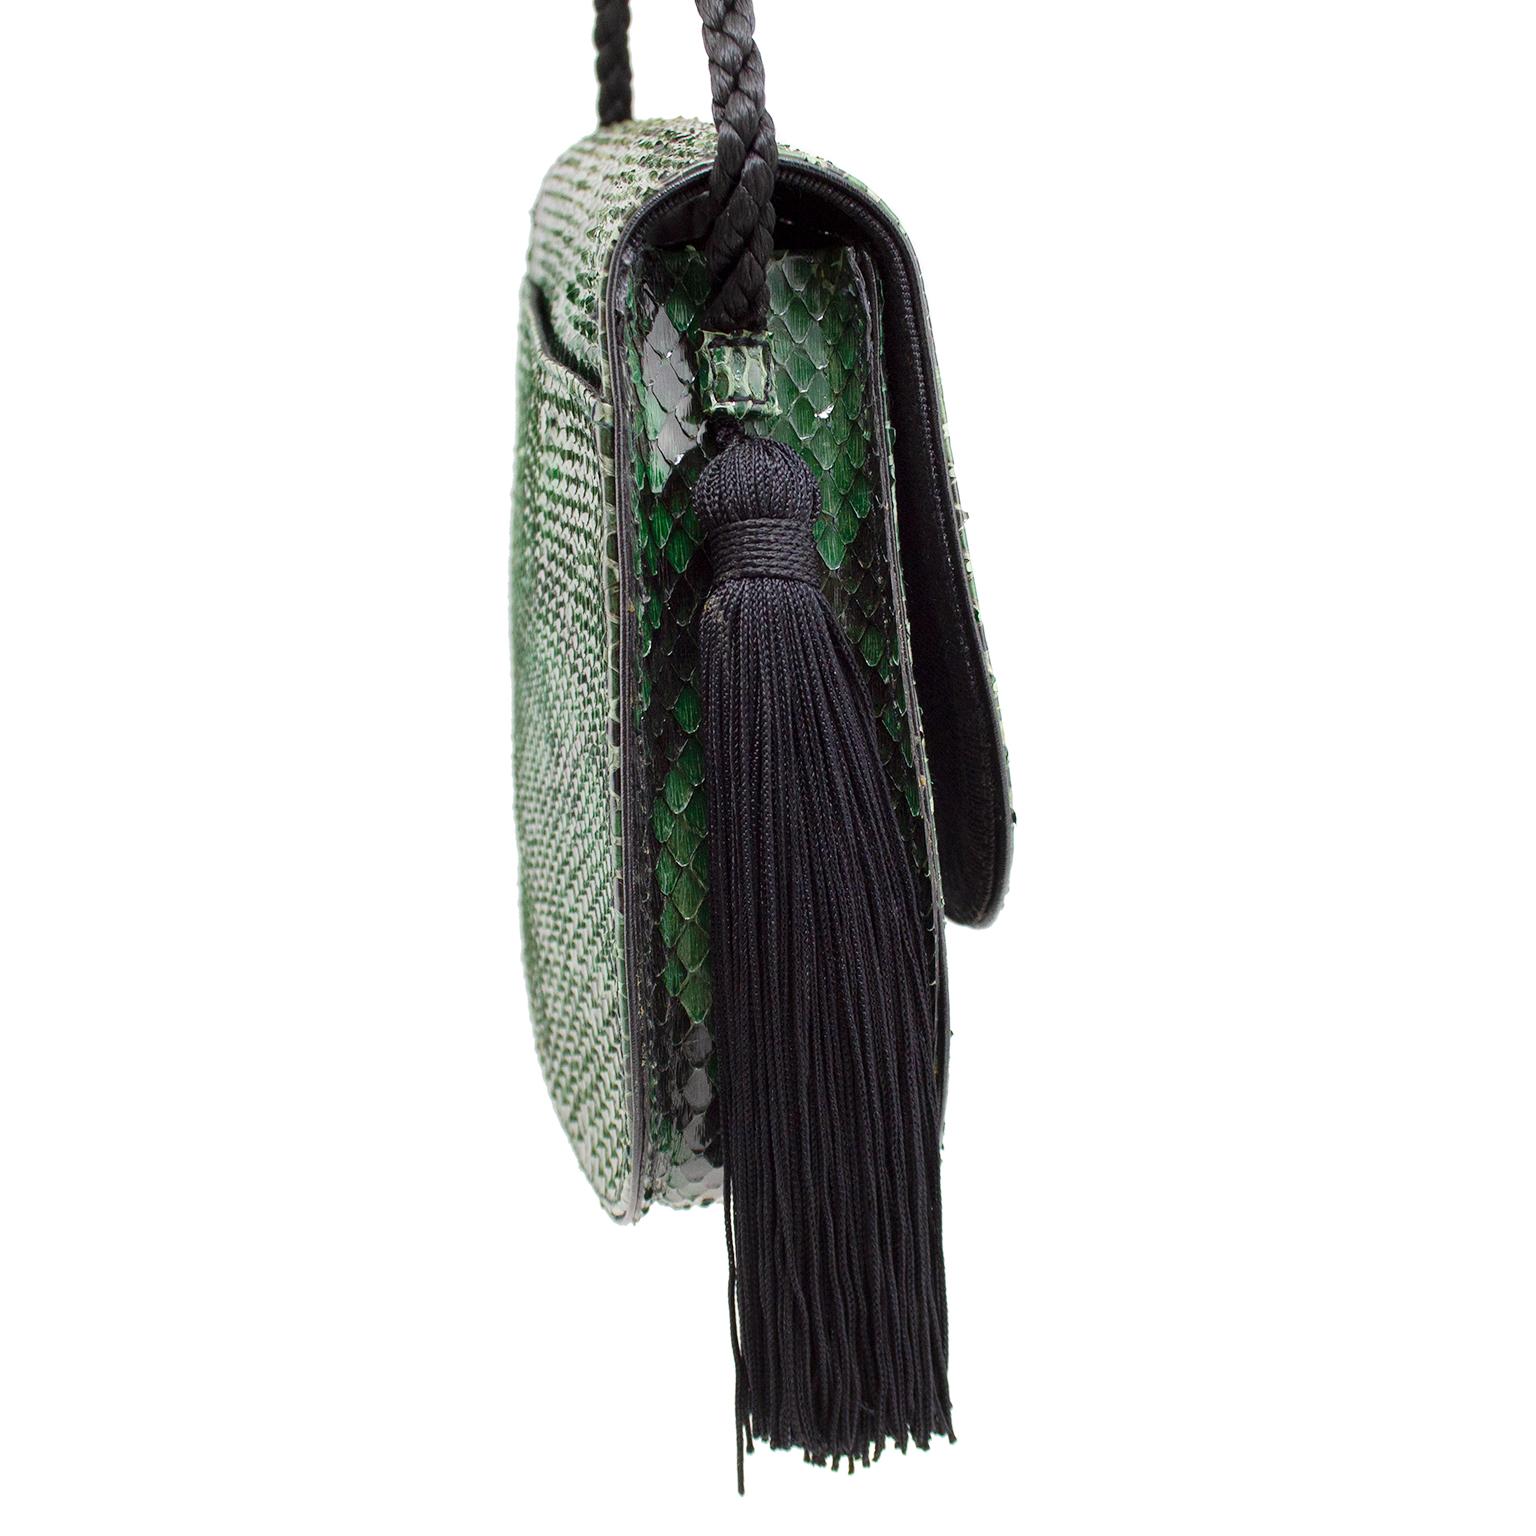 1980s Ungaro Green and Black Bag Patterned Leather with Tassels In Good Condition For Sale In Toronto, Ontario